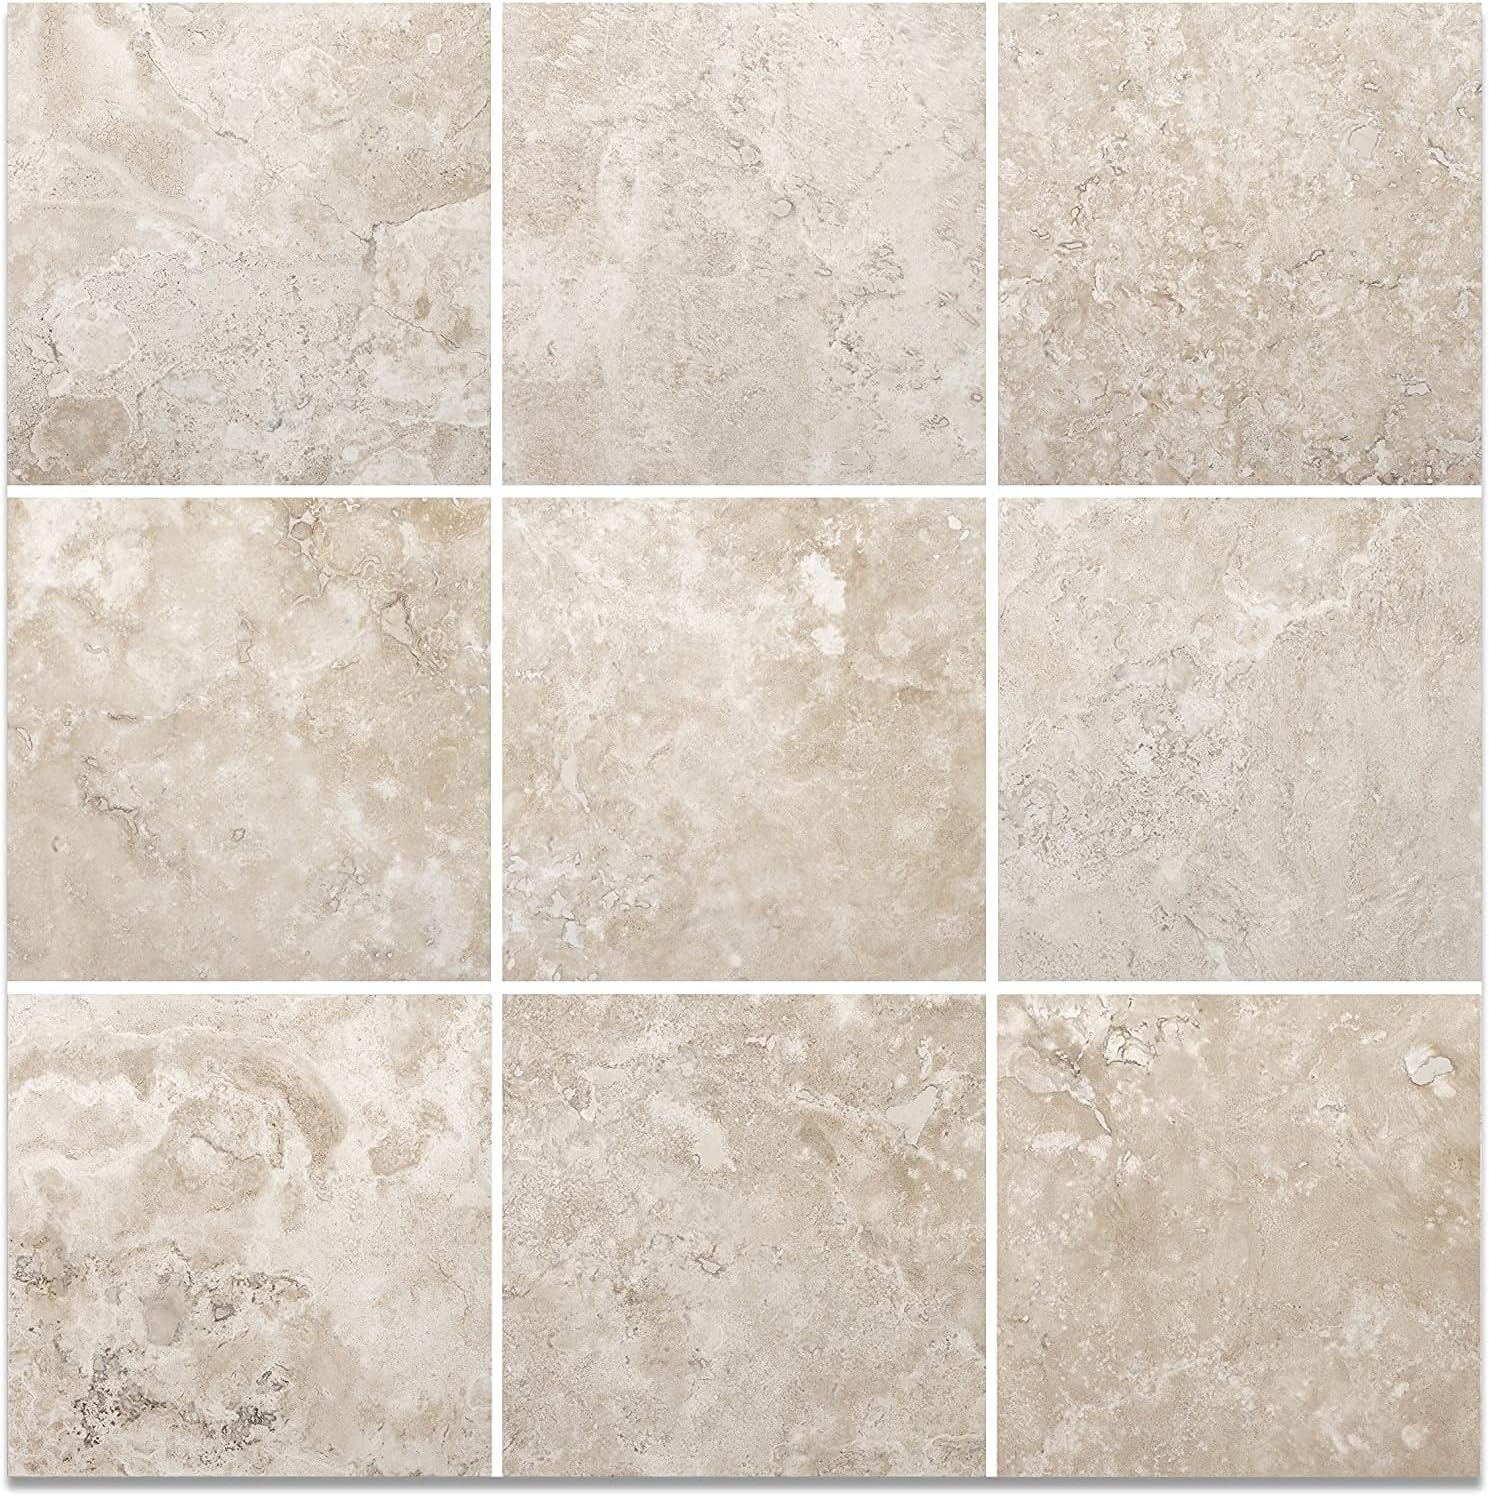 12x12 Tumbled Travertine Natural Stone Floor and Wall Tile in Durango Cream (Box of 10 Pieces)